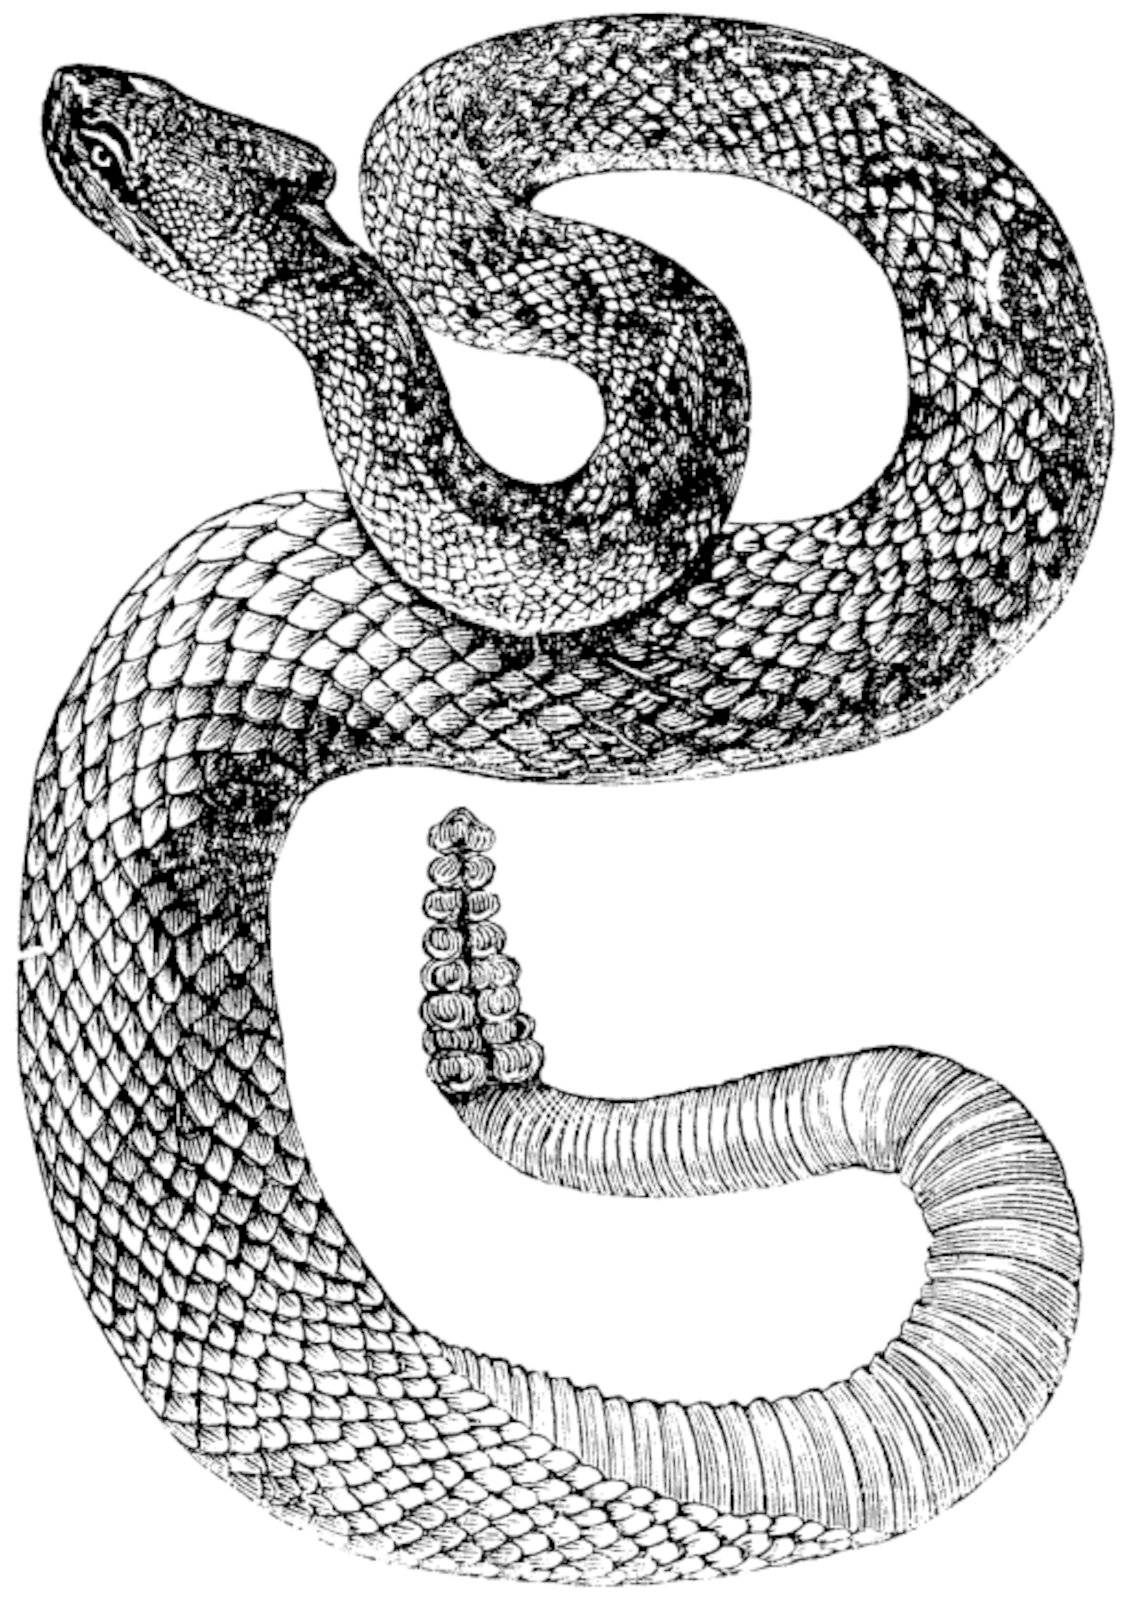 South American Rattlesnake or Tropical Rattlesnake or Crotalus durissus, vintage engraving. Old engraved illustration of a South American Rattlesnake.